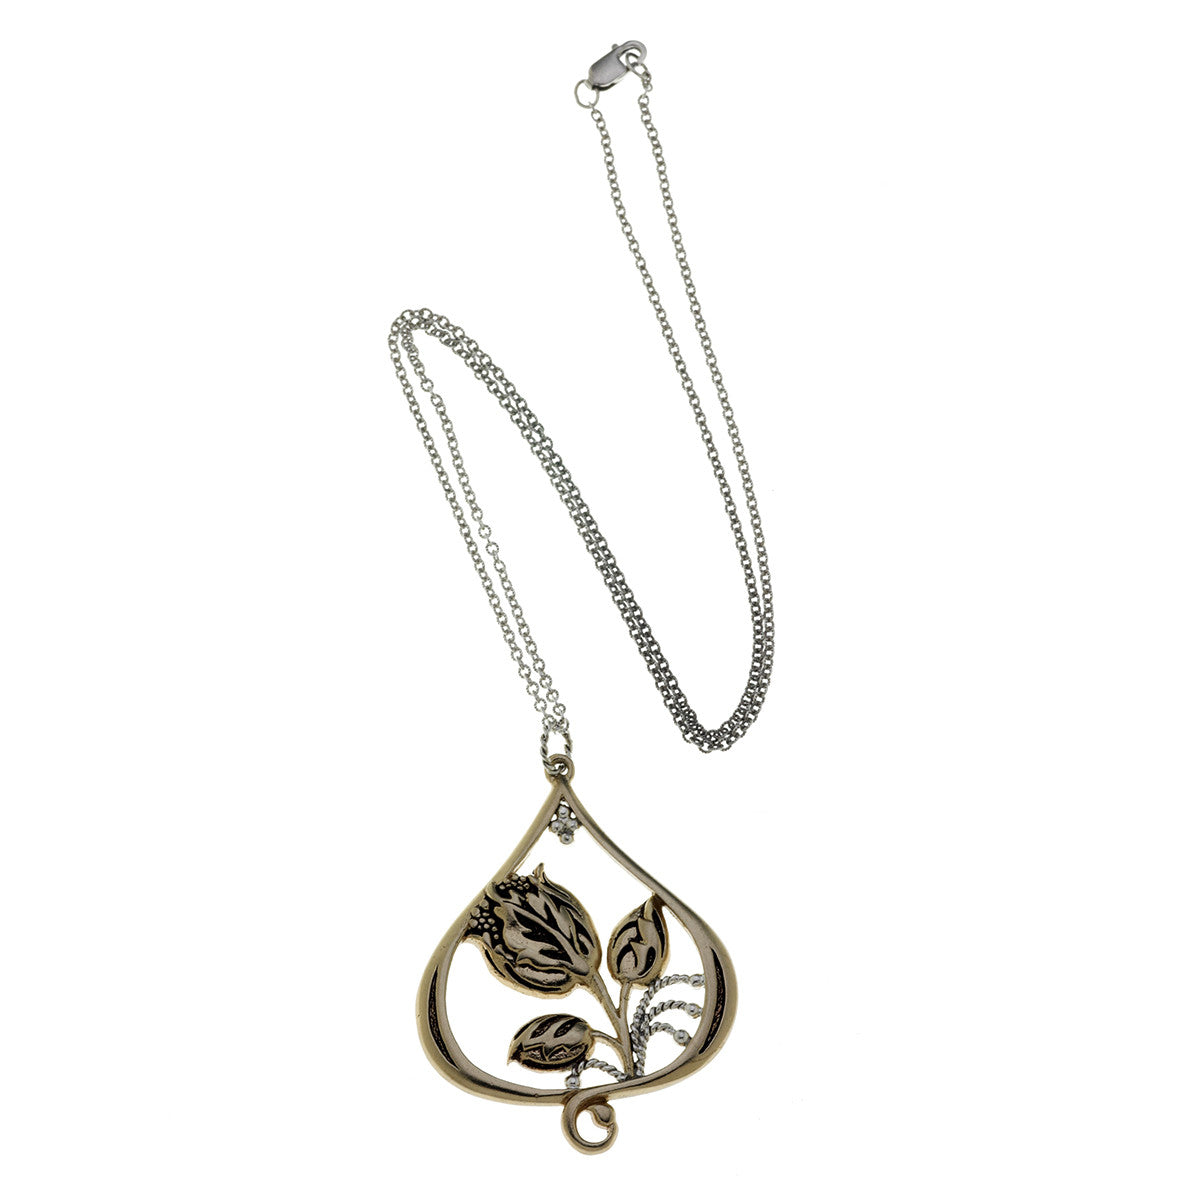 William Morris Hyacinth Teardrop Bronze And Sterling Silver Necklace - Cynthia Gale New York Jewelry